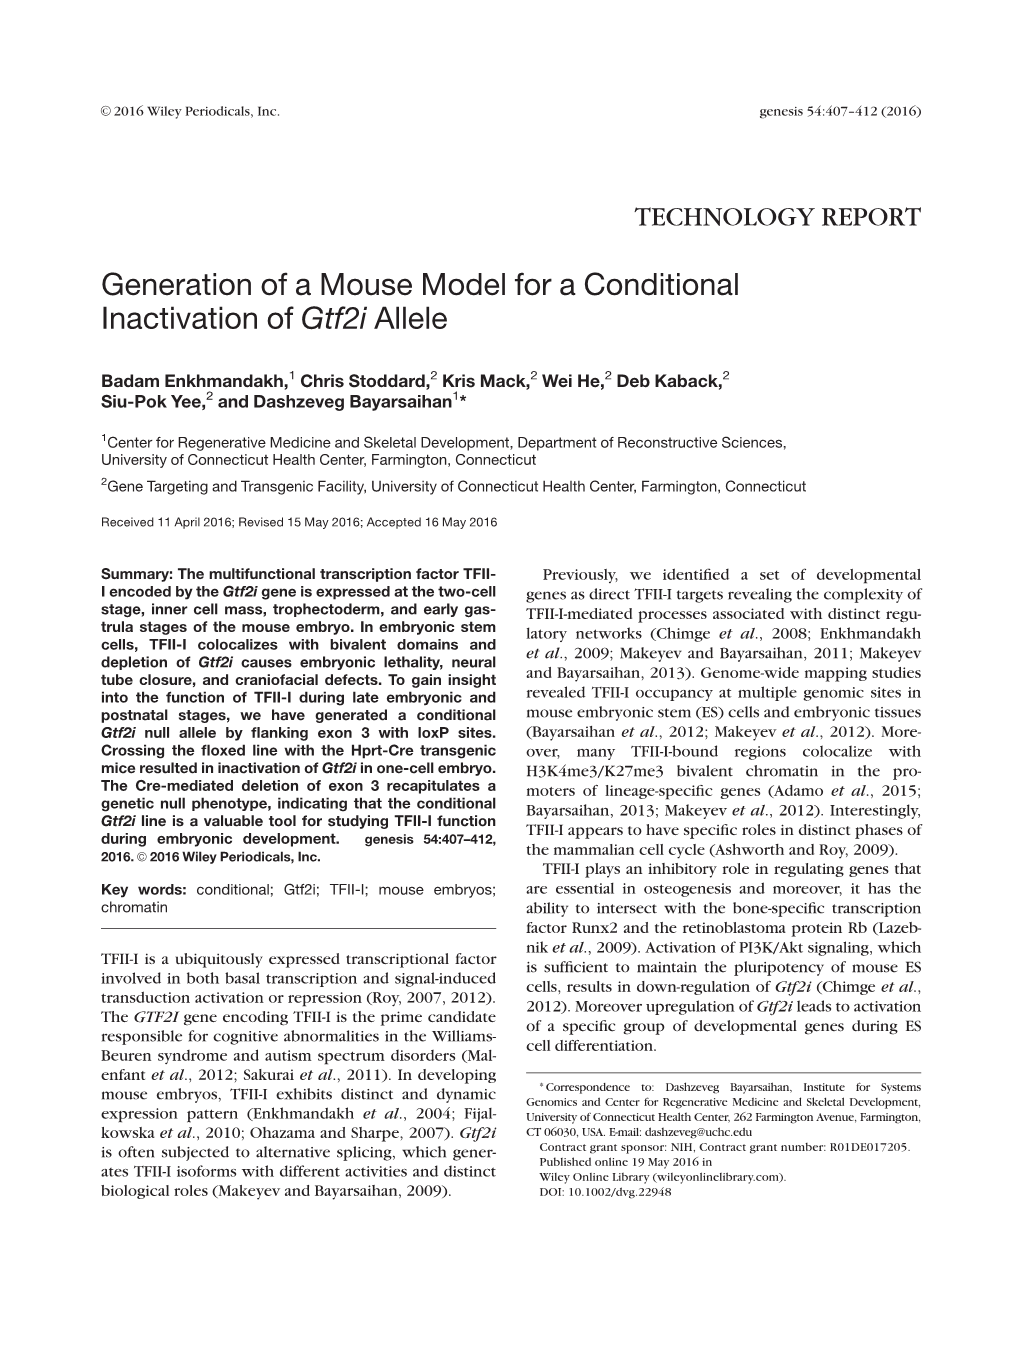 Generation of a Mouse Model for a Conditional Inactivation of Gtf2i Allele